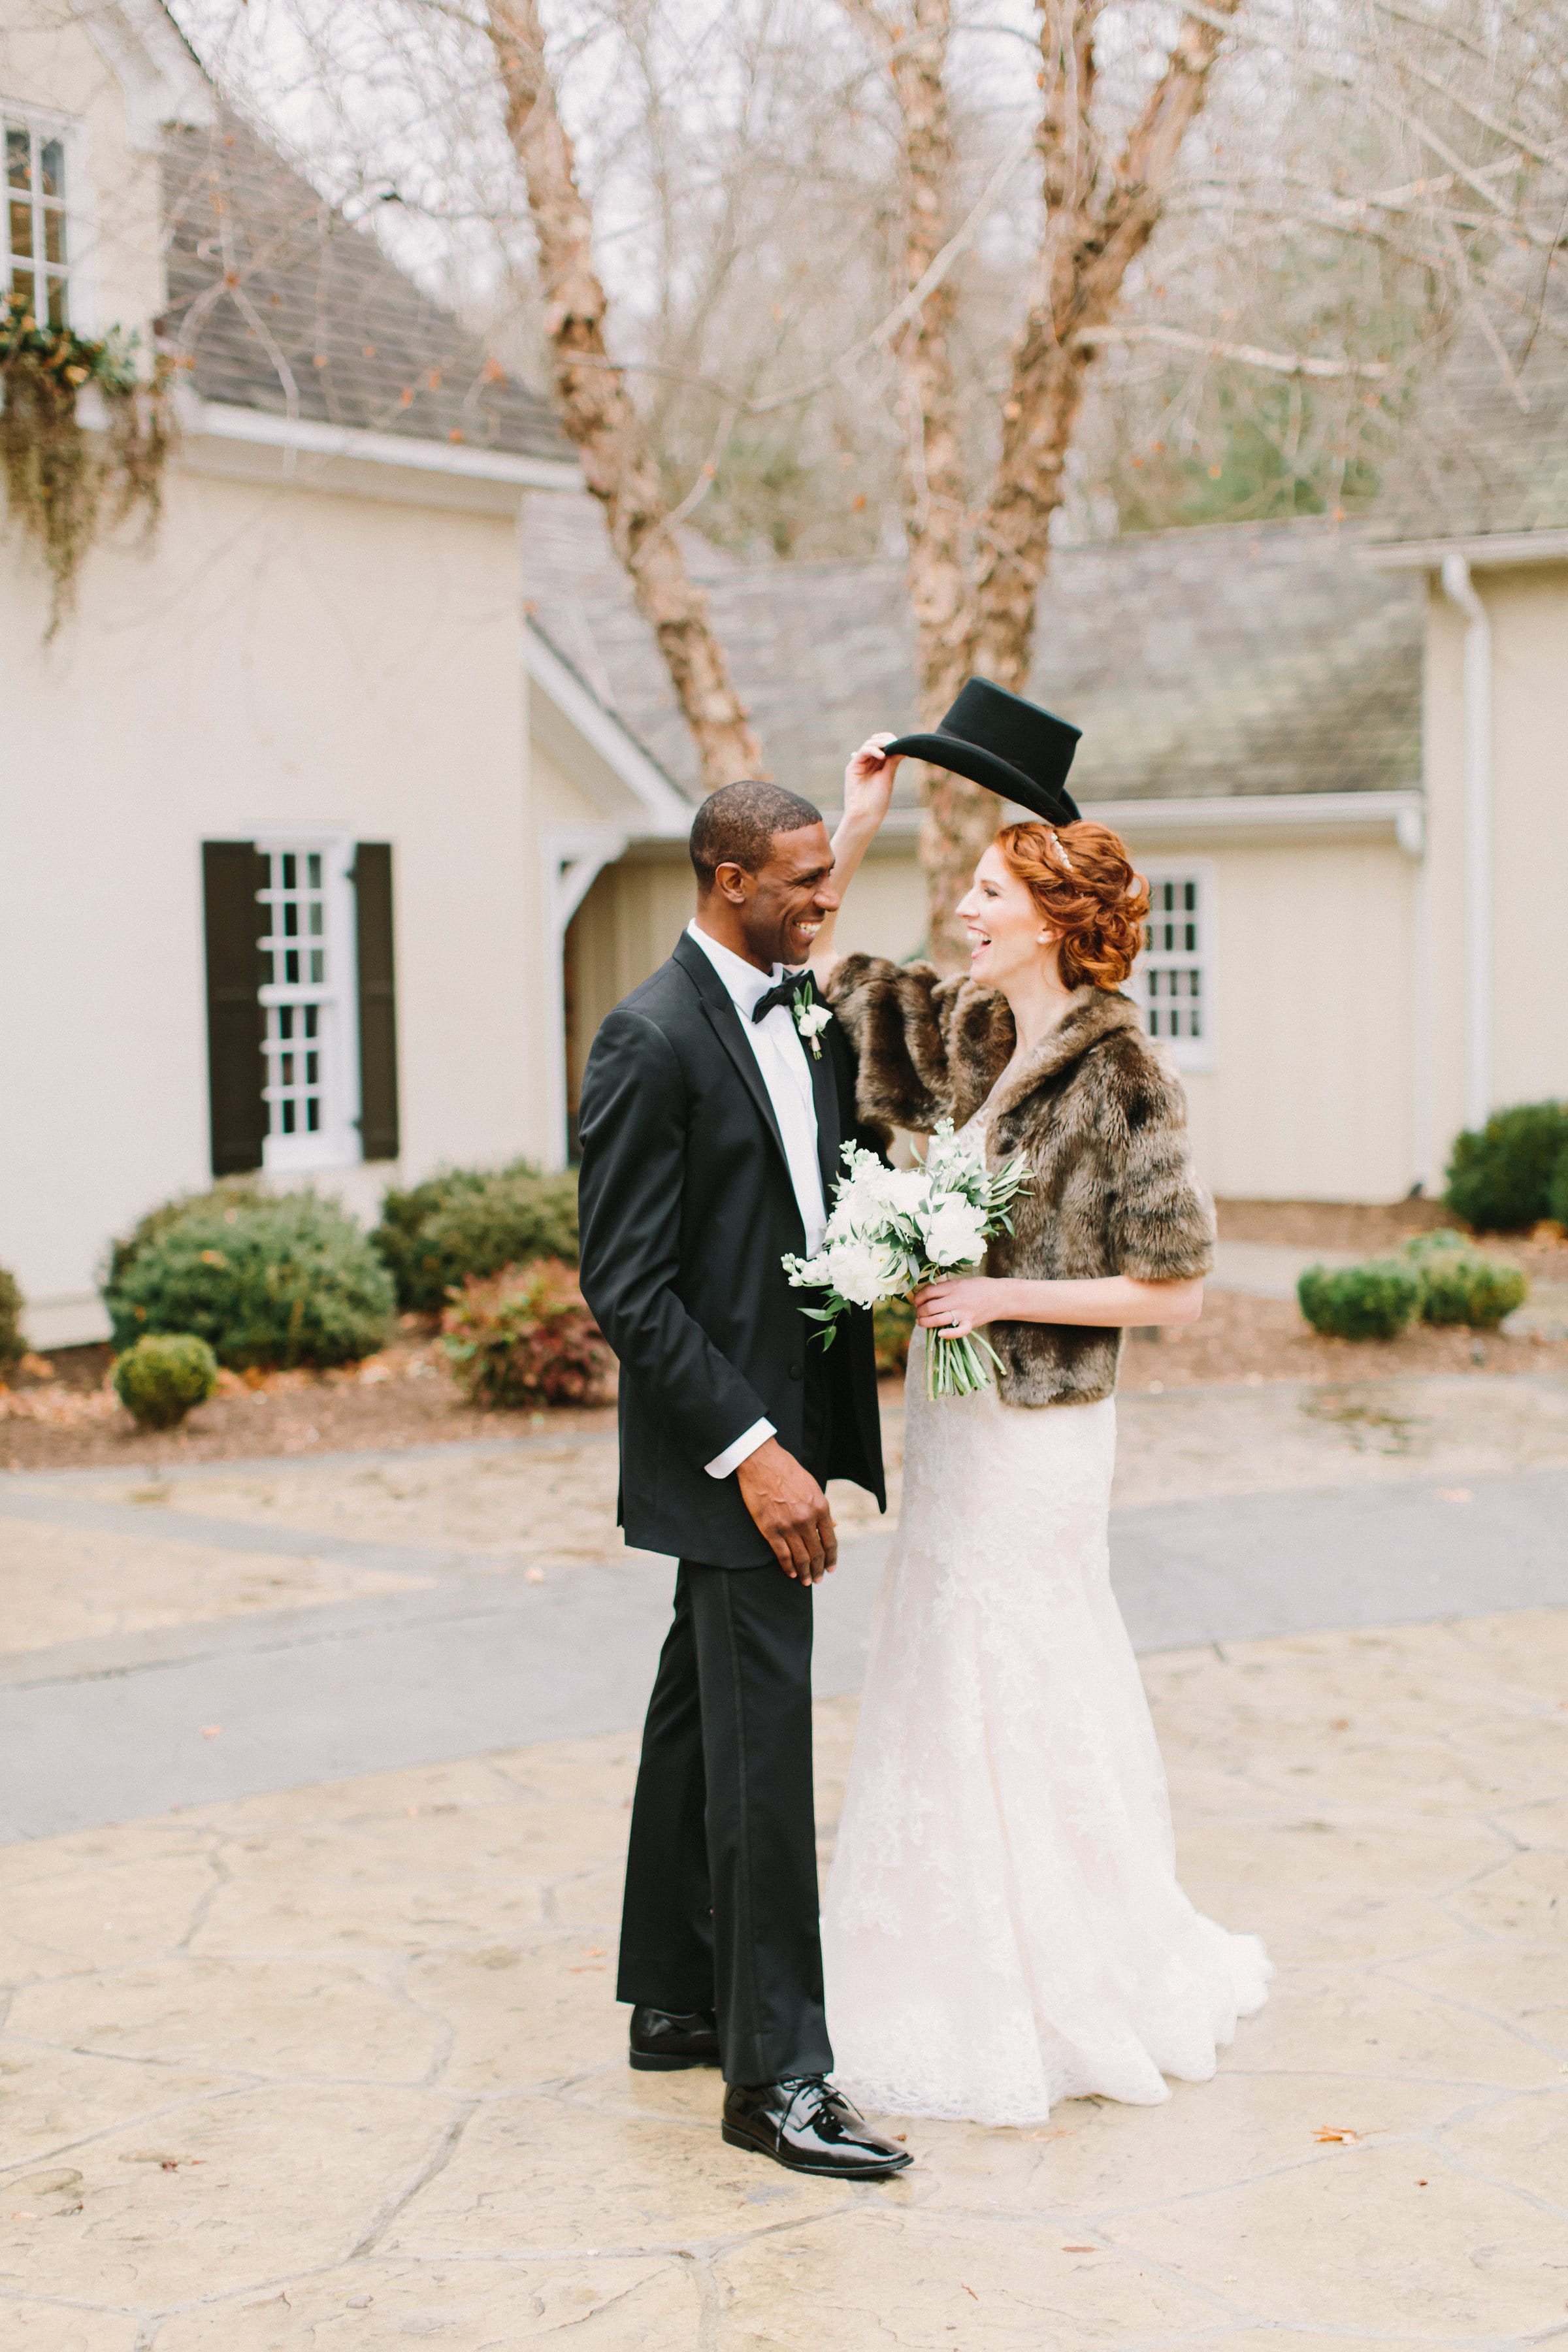 Winter Wedding Featuring Illusion Lace Wedding Dress Noelle - Meredith Sledge Photography